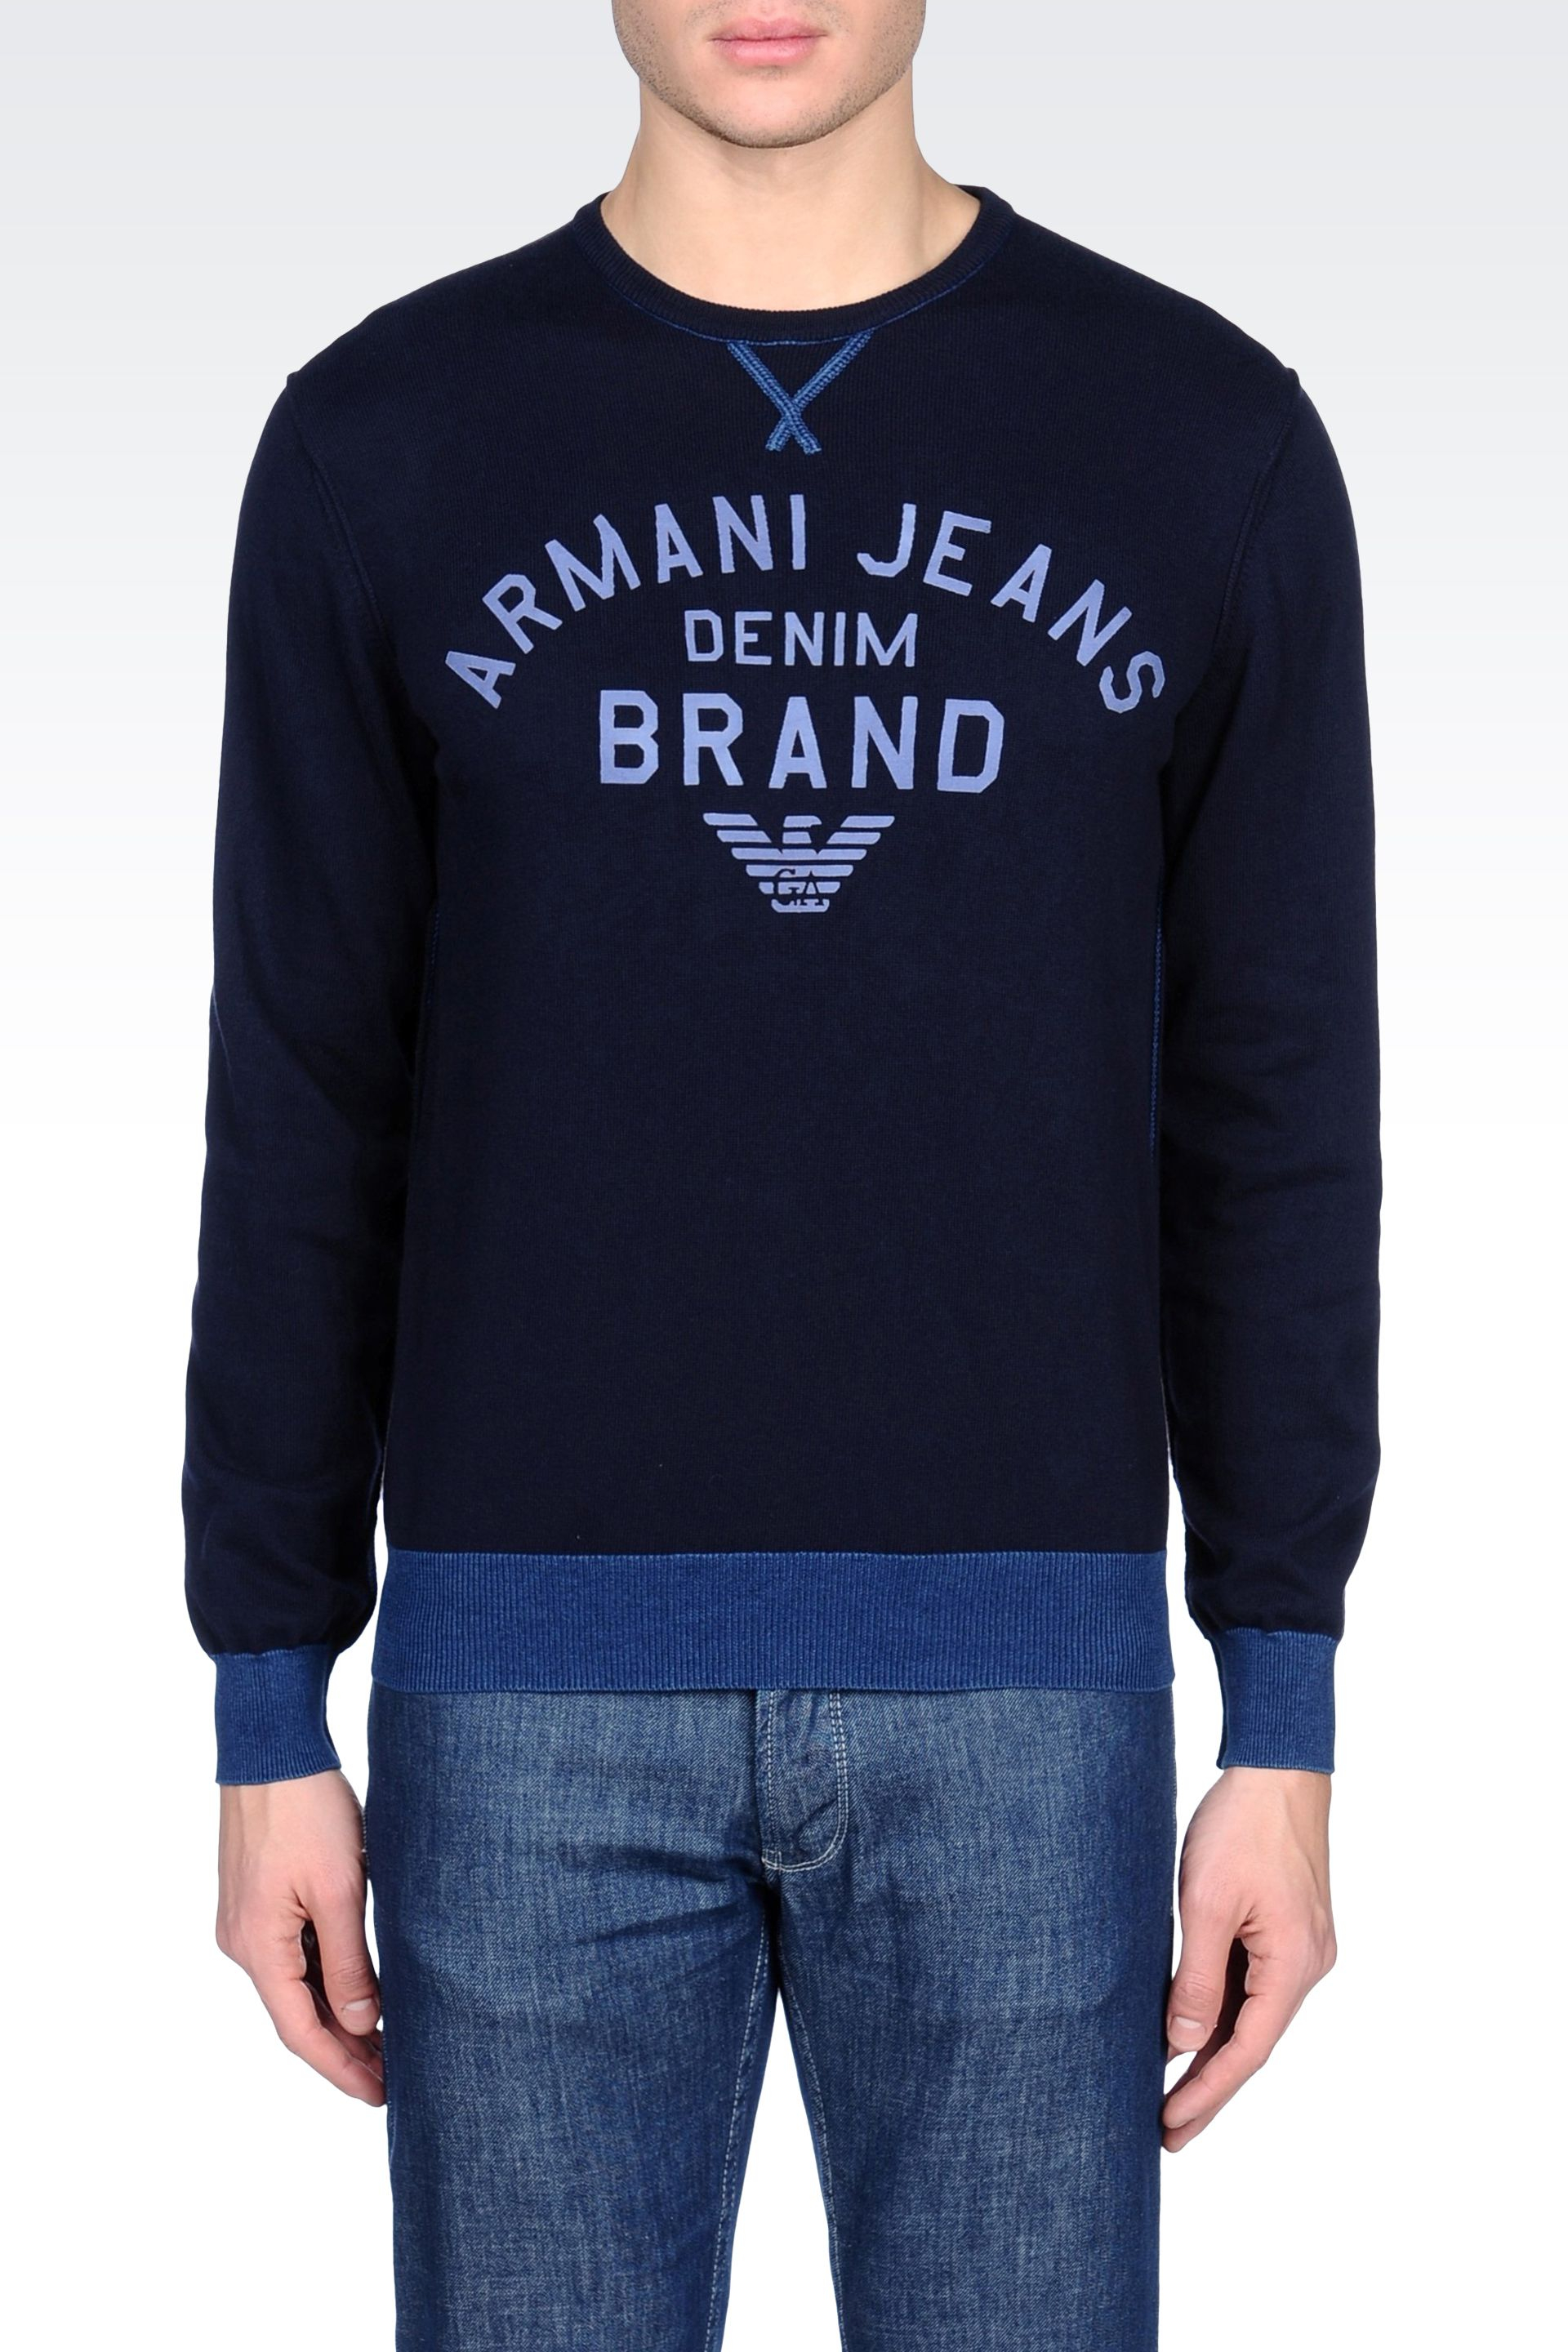 Lyst - Armani jeans Crew Neck Cotton Sweater with Logo in Blue for Men